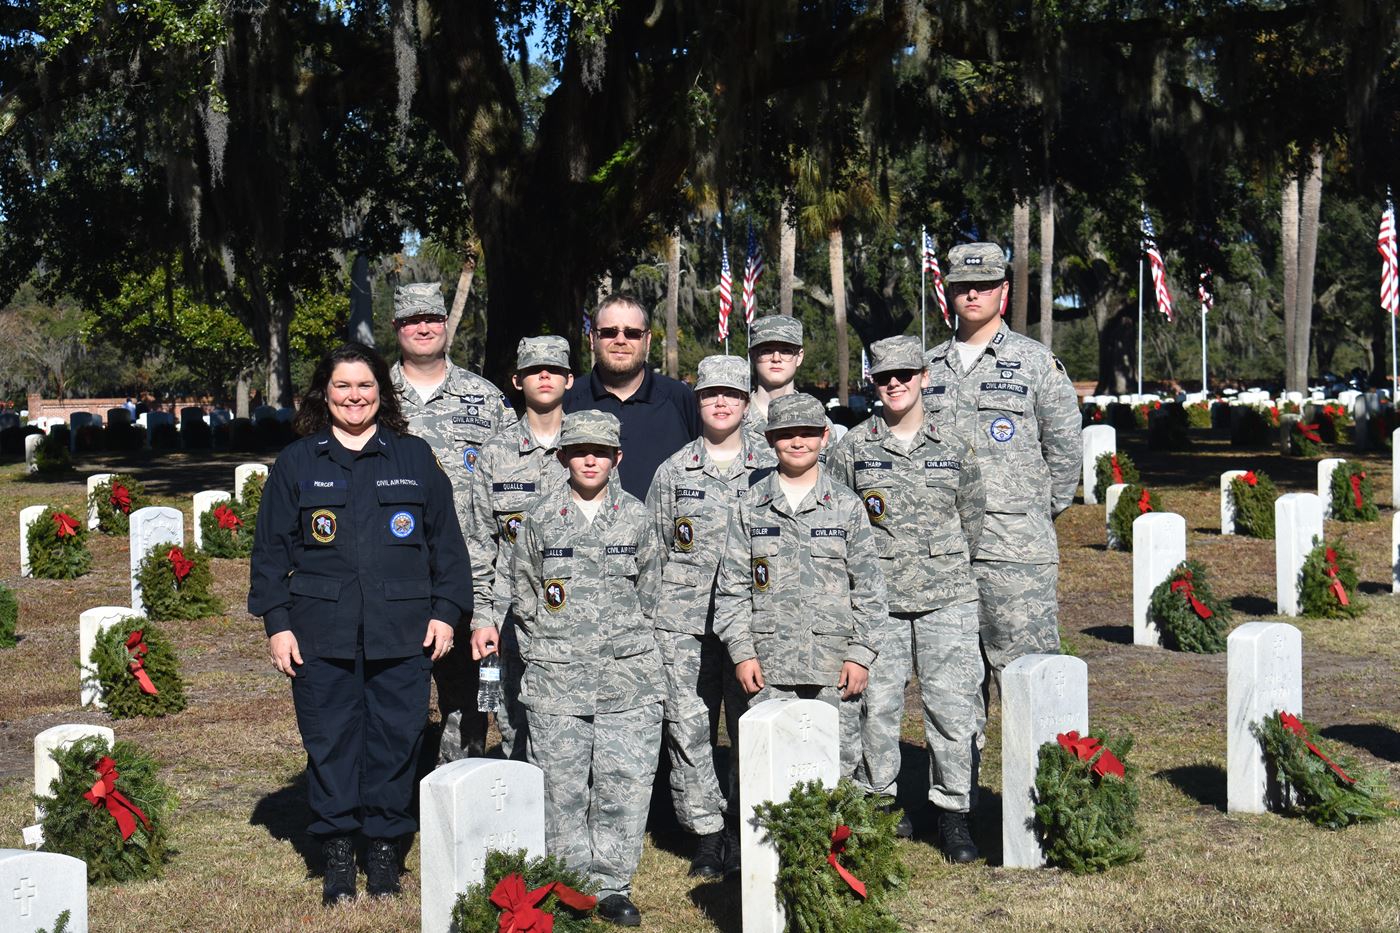 At the end of the morning, 10 cadets and senior members (plus two cadets not pictured) grab a photo before leaving the Beaufort National Cemetery.